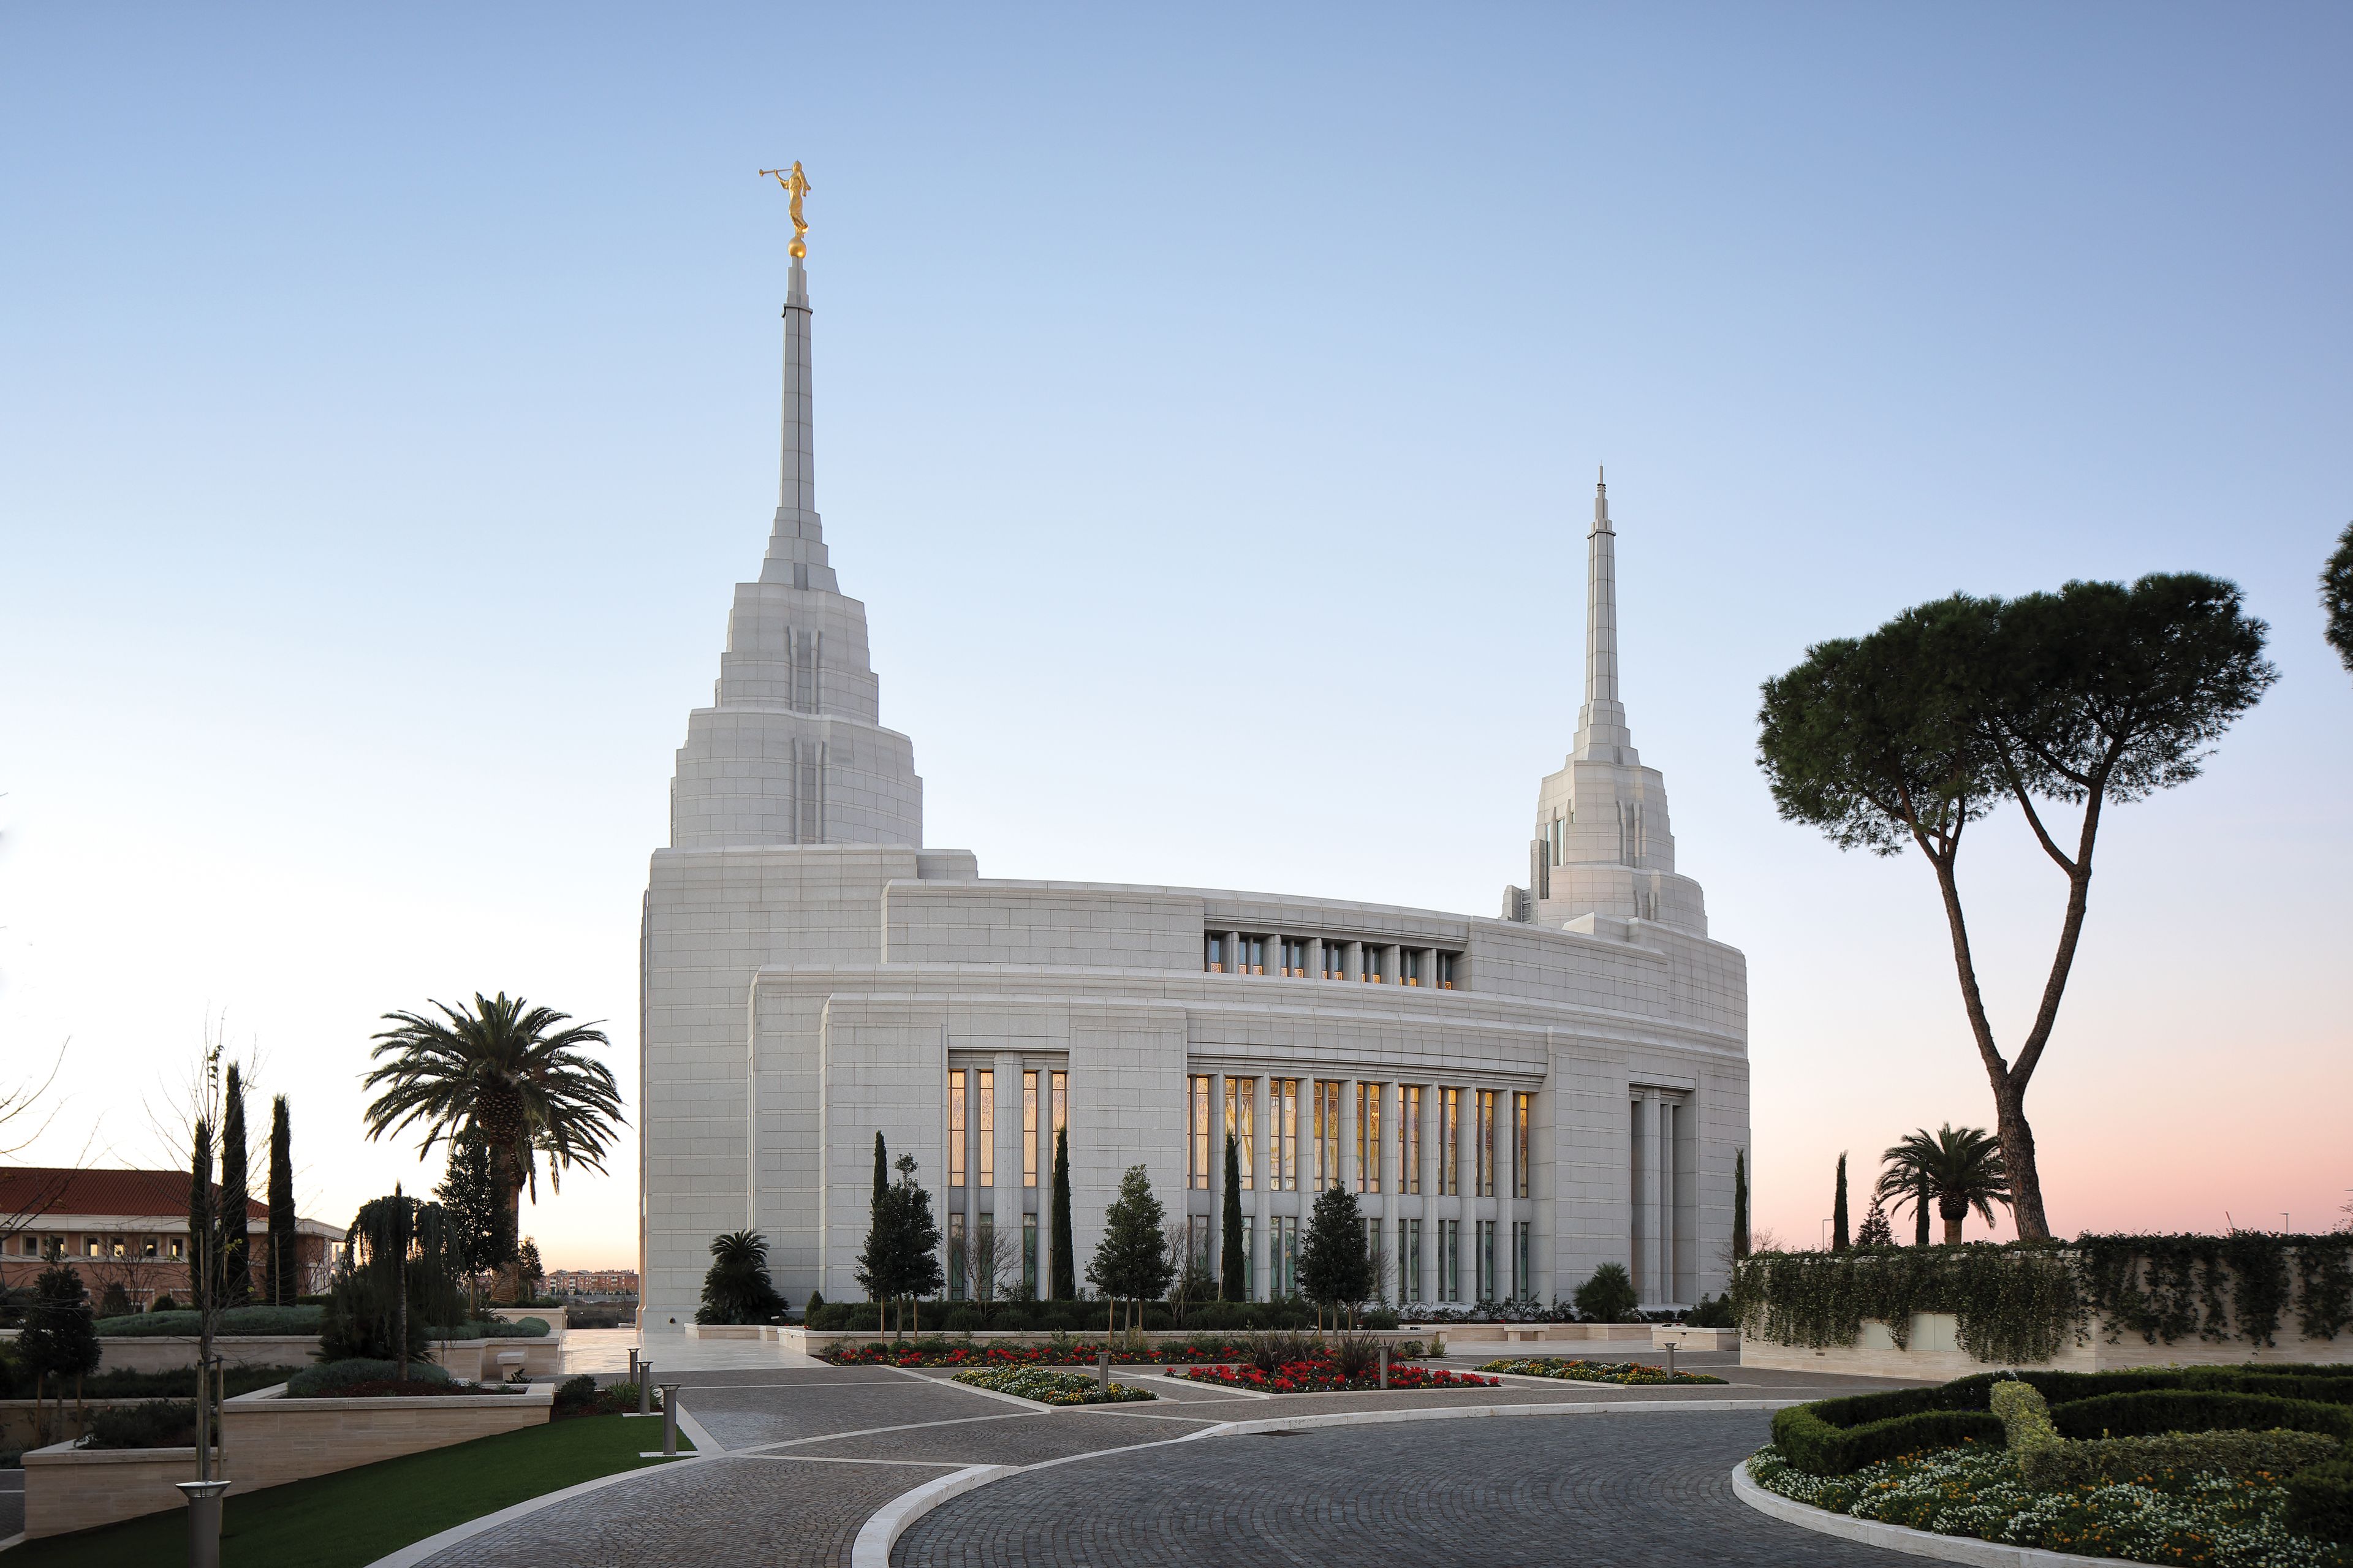 The grounds of the Rome Italy Temple during the day.